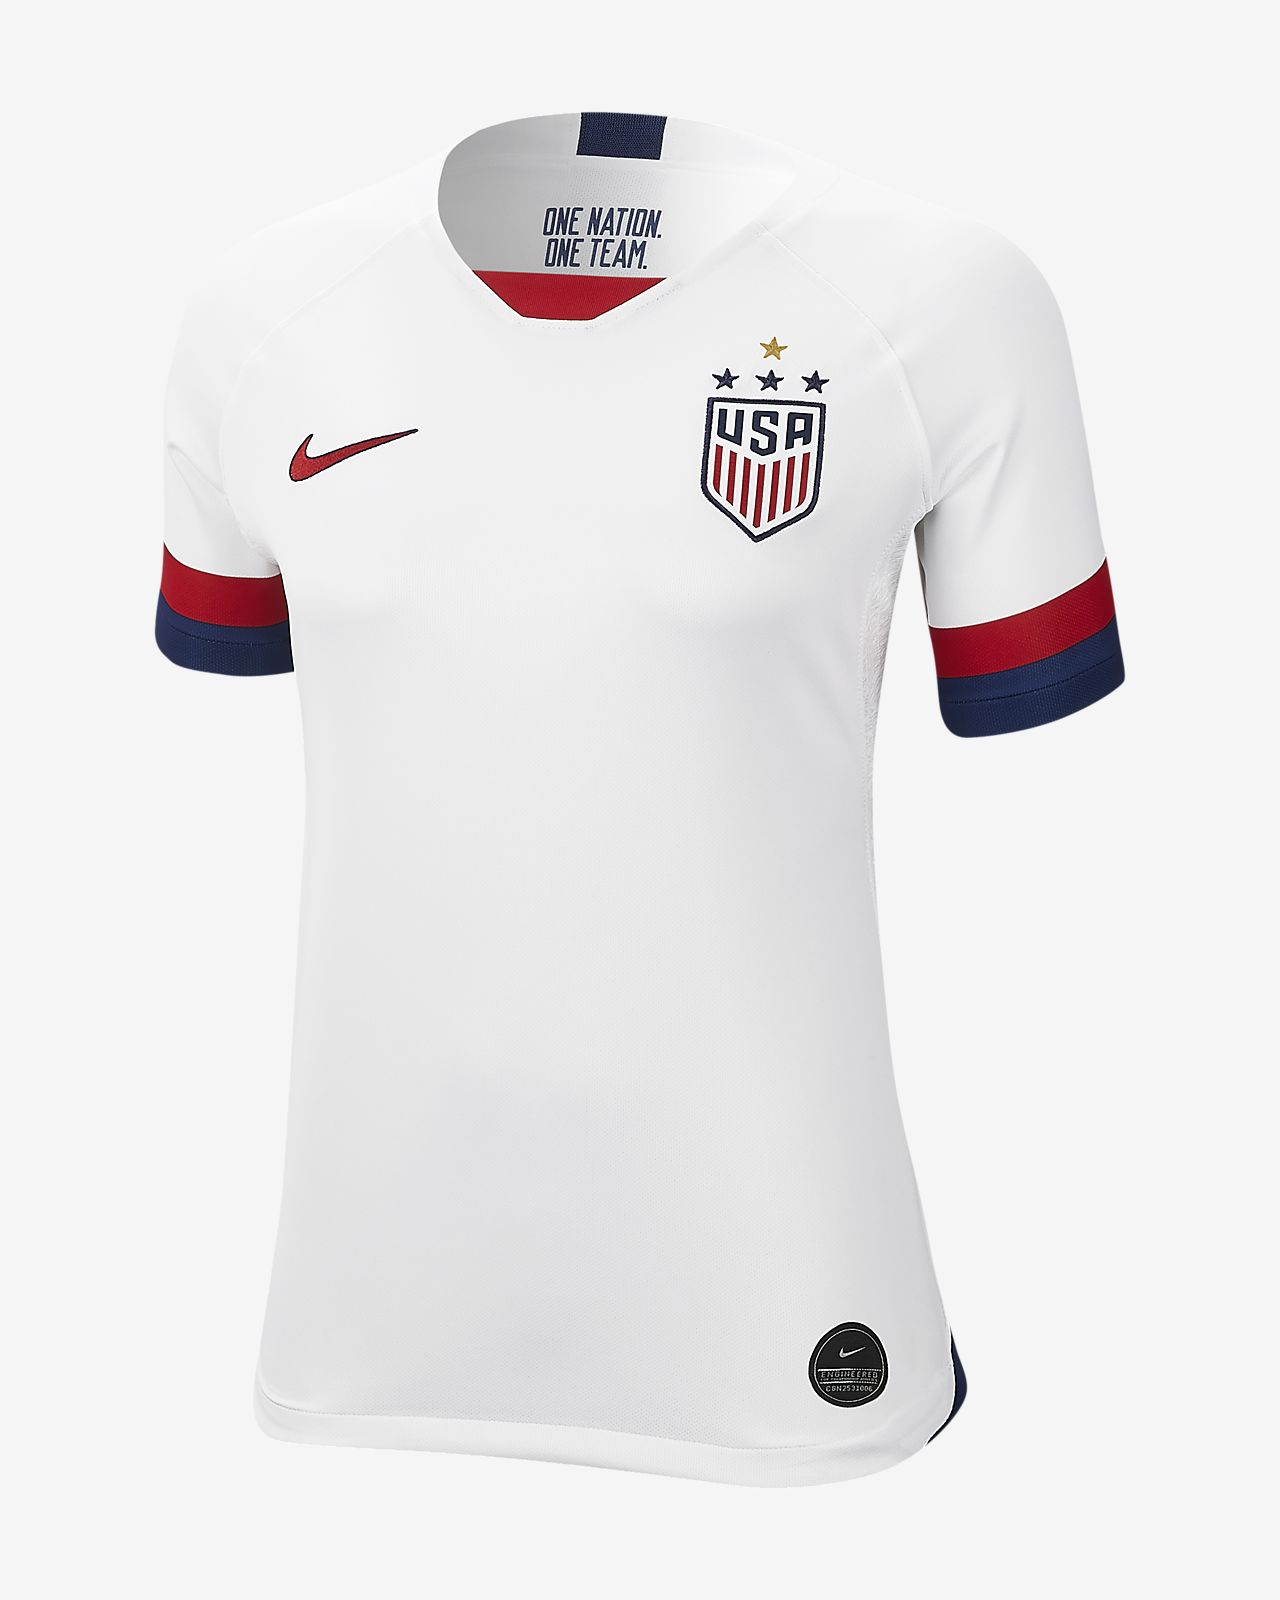 USA Women's Soccer Jersey and Short Set-2019/2020 Four Star Red and White 